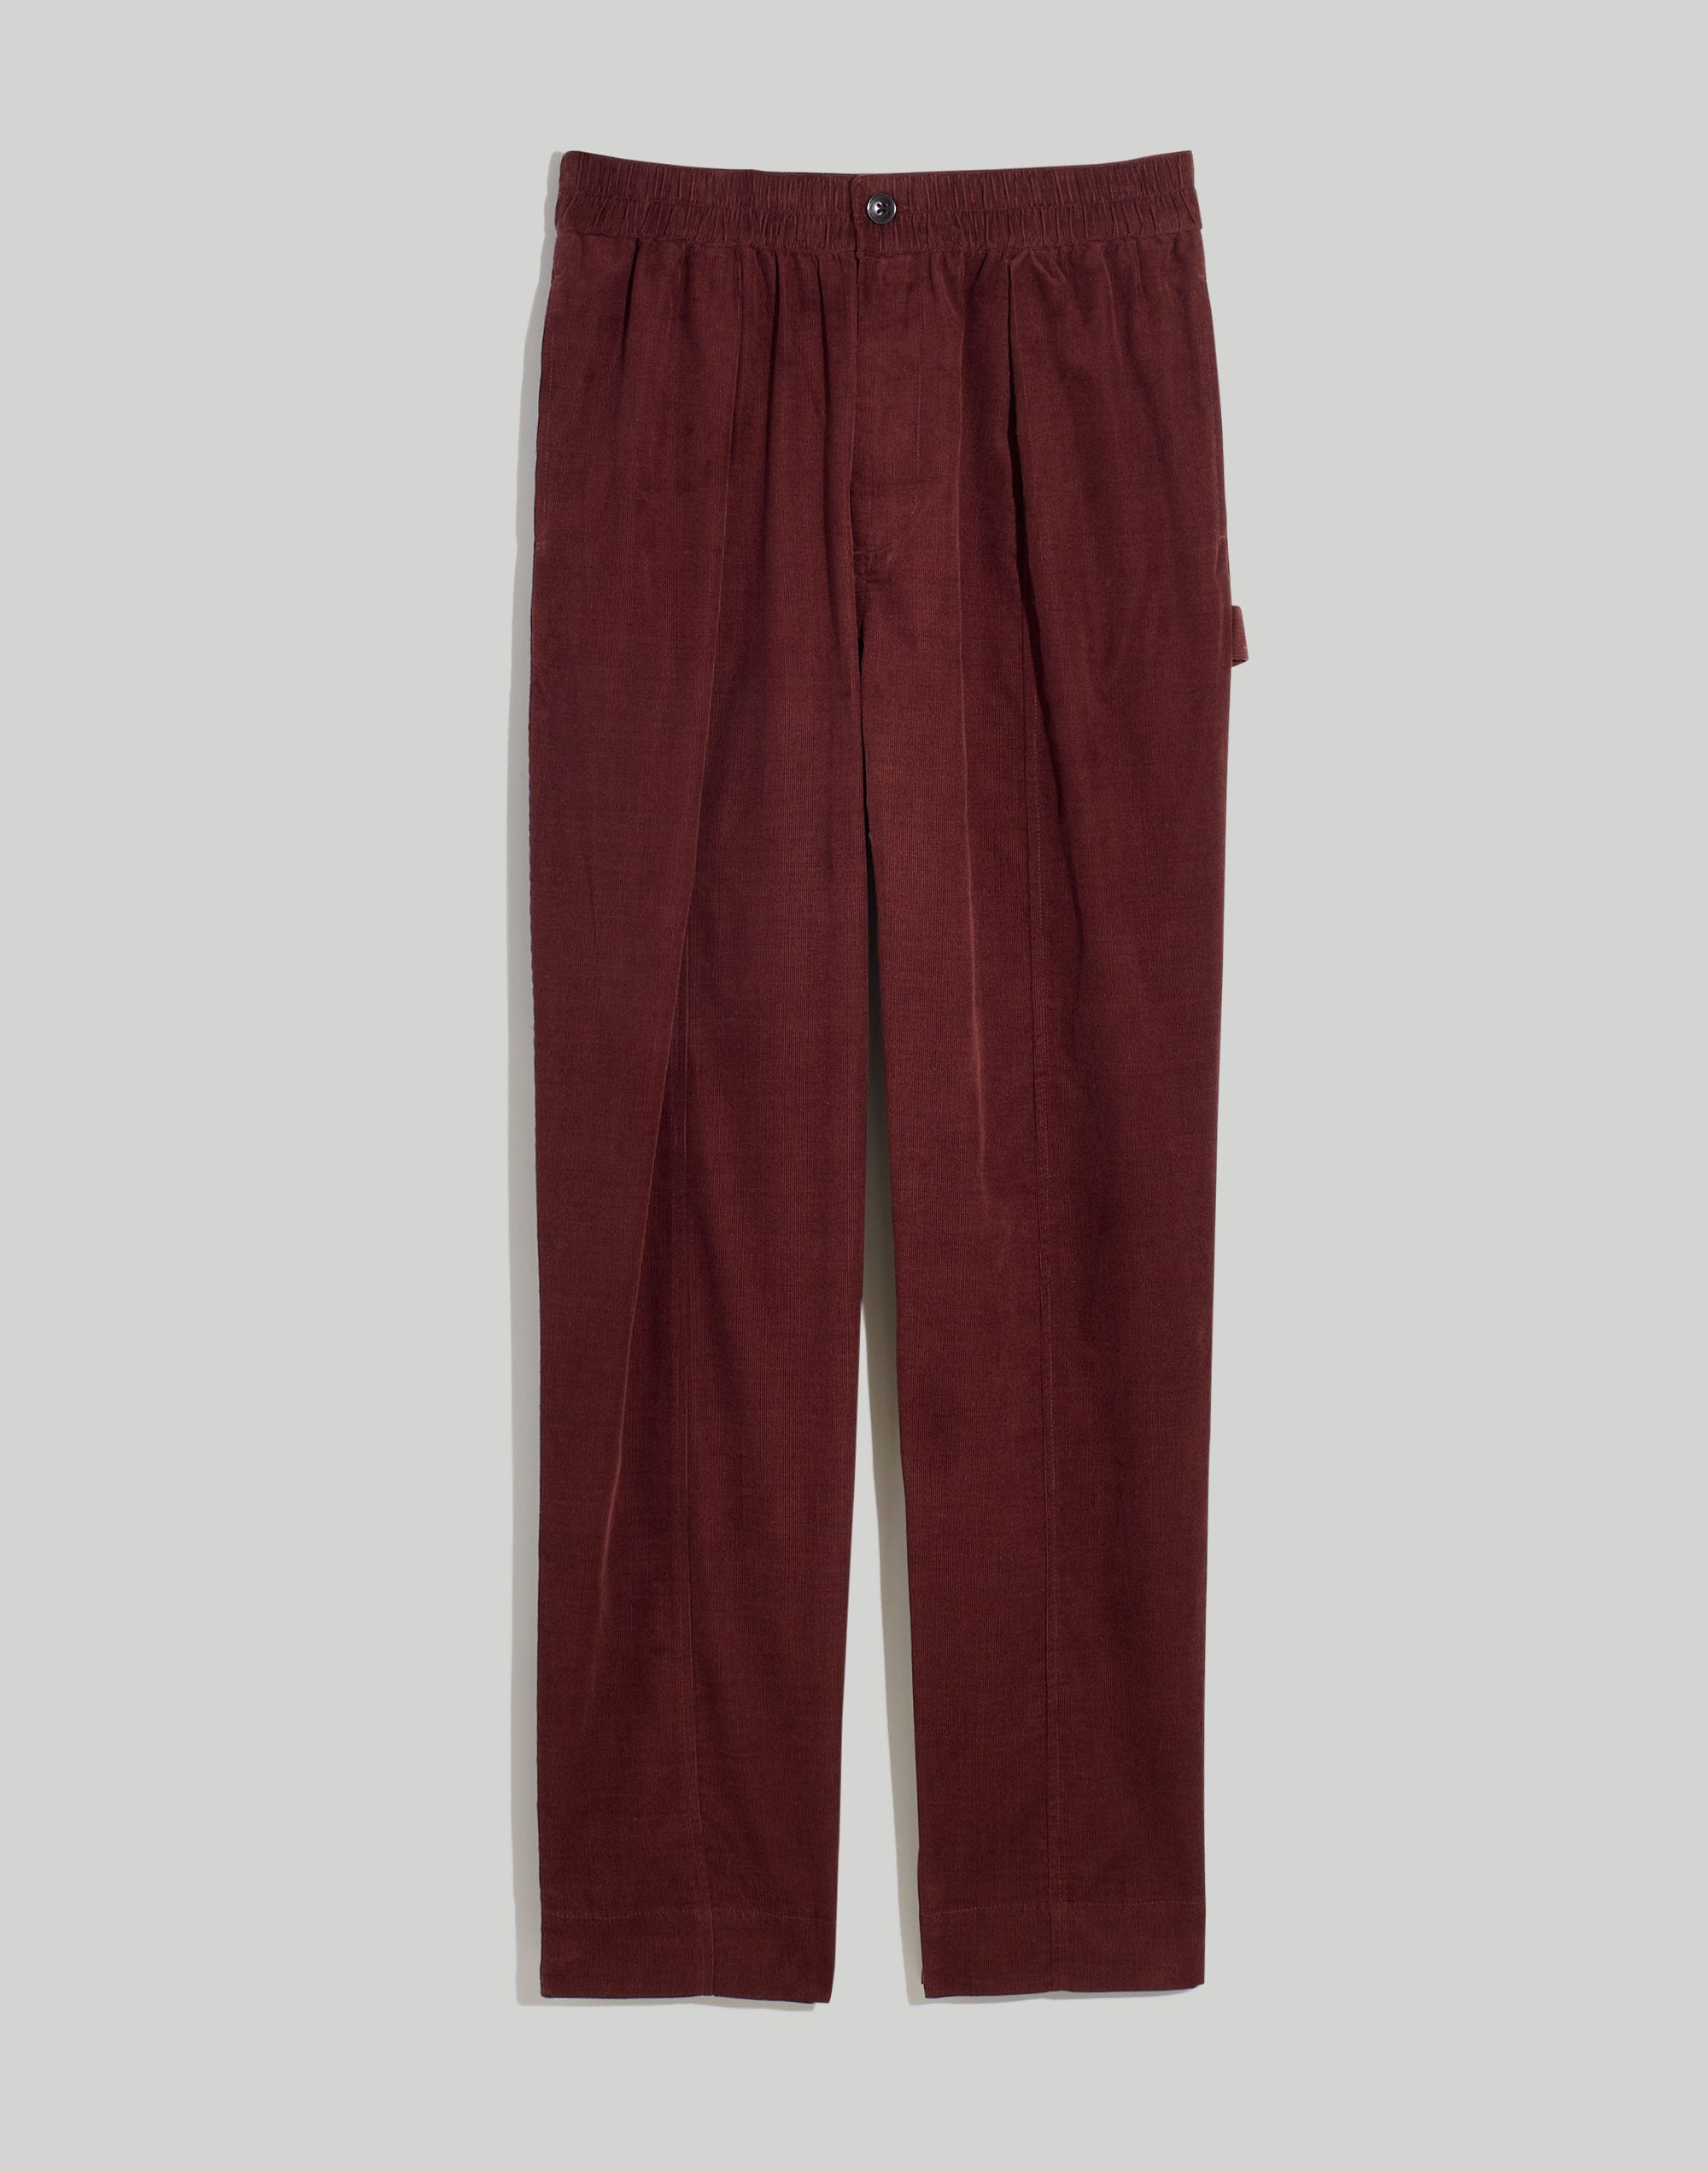 Brown Tapered Pleated Corduroy High Waisted Pants, Velvet Pants